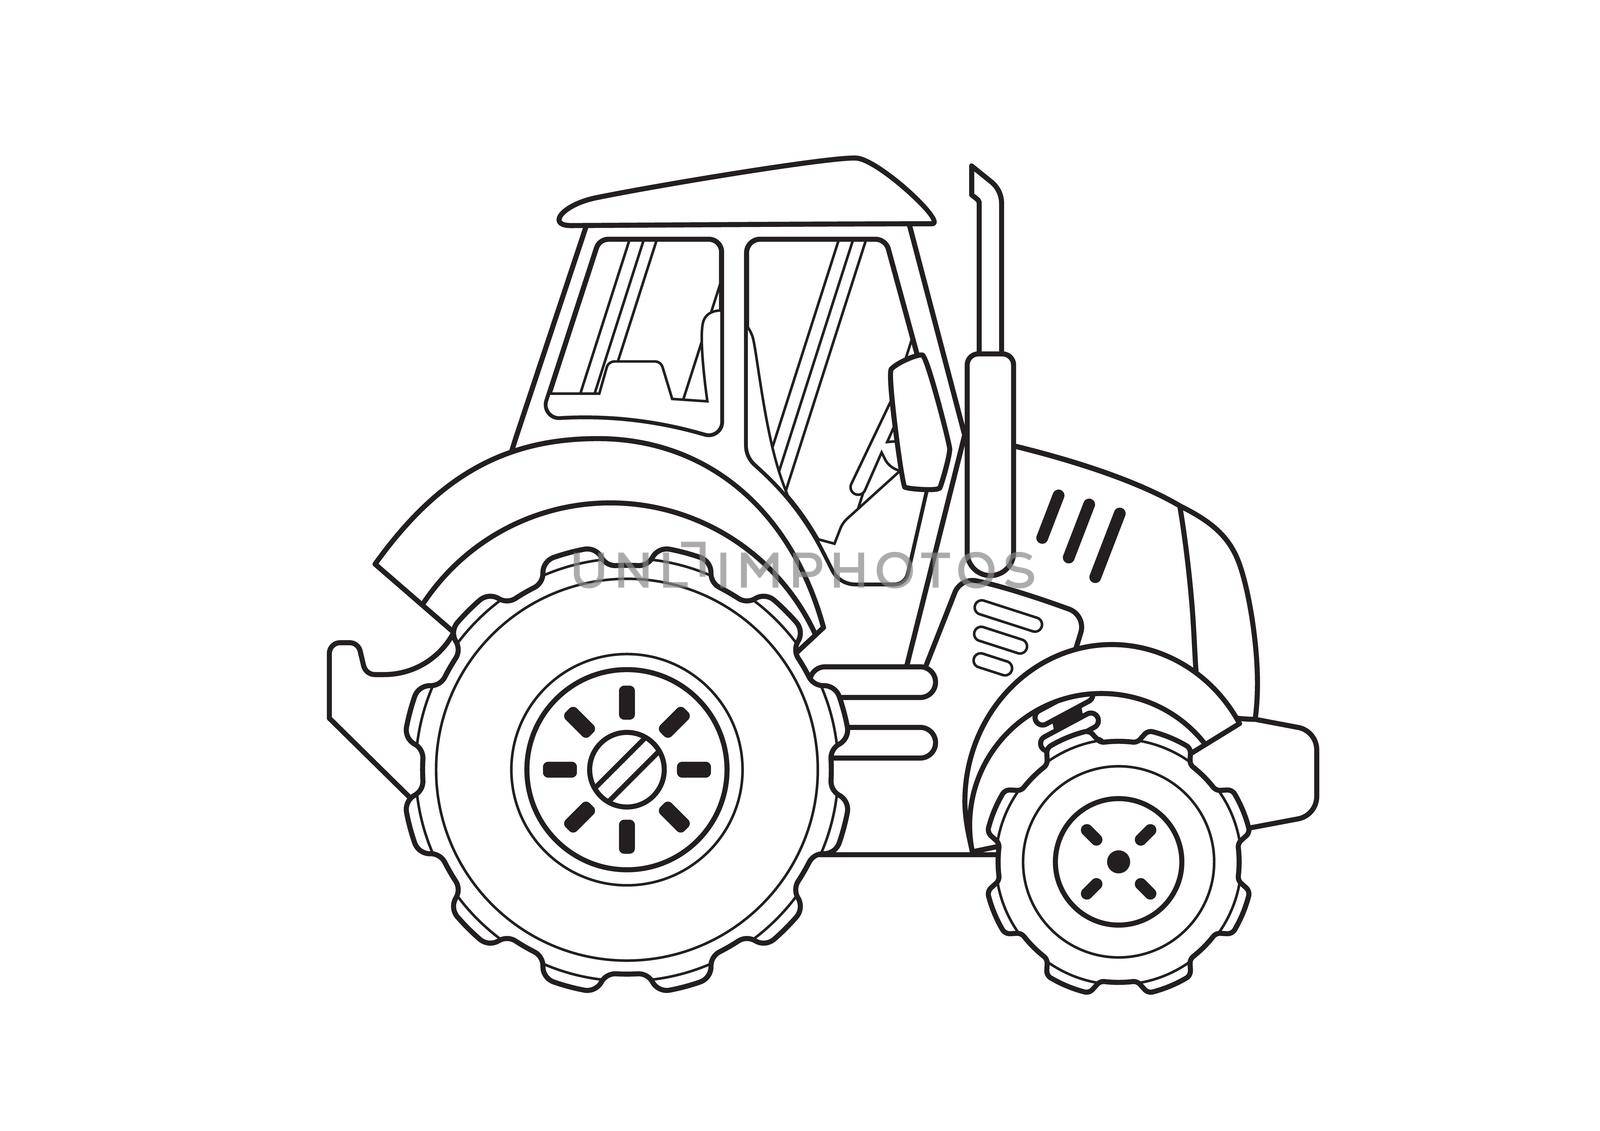 Blue Tractor Side View Coloring Book. Line Art isolated on a white background.